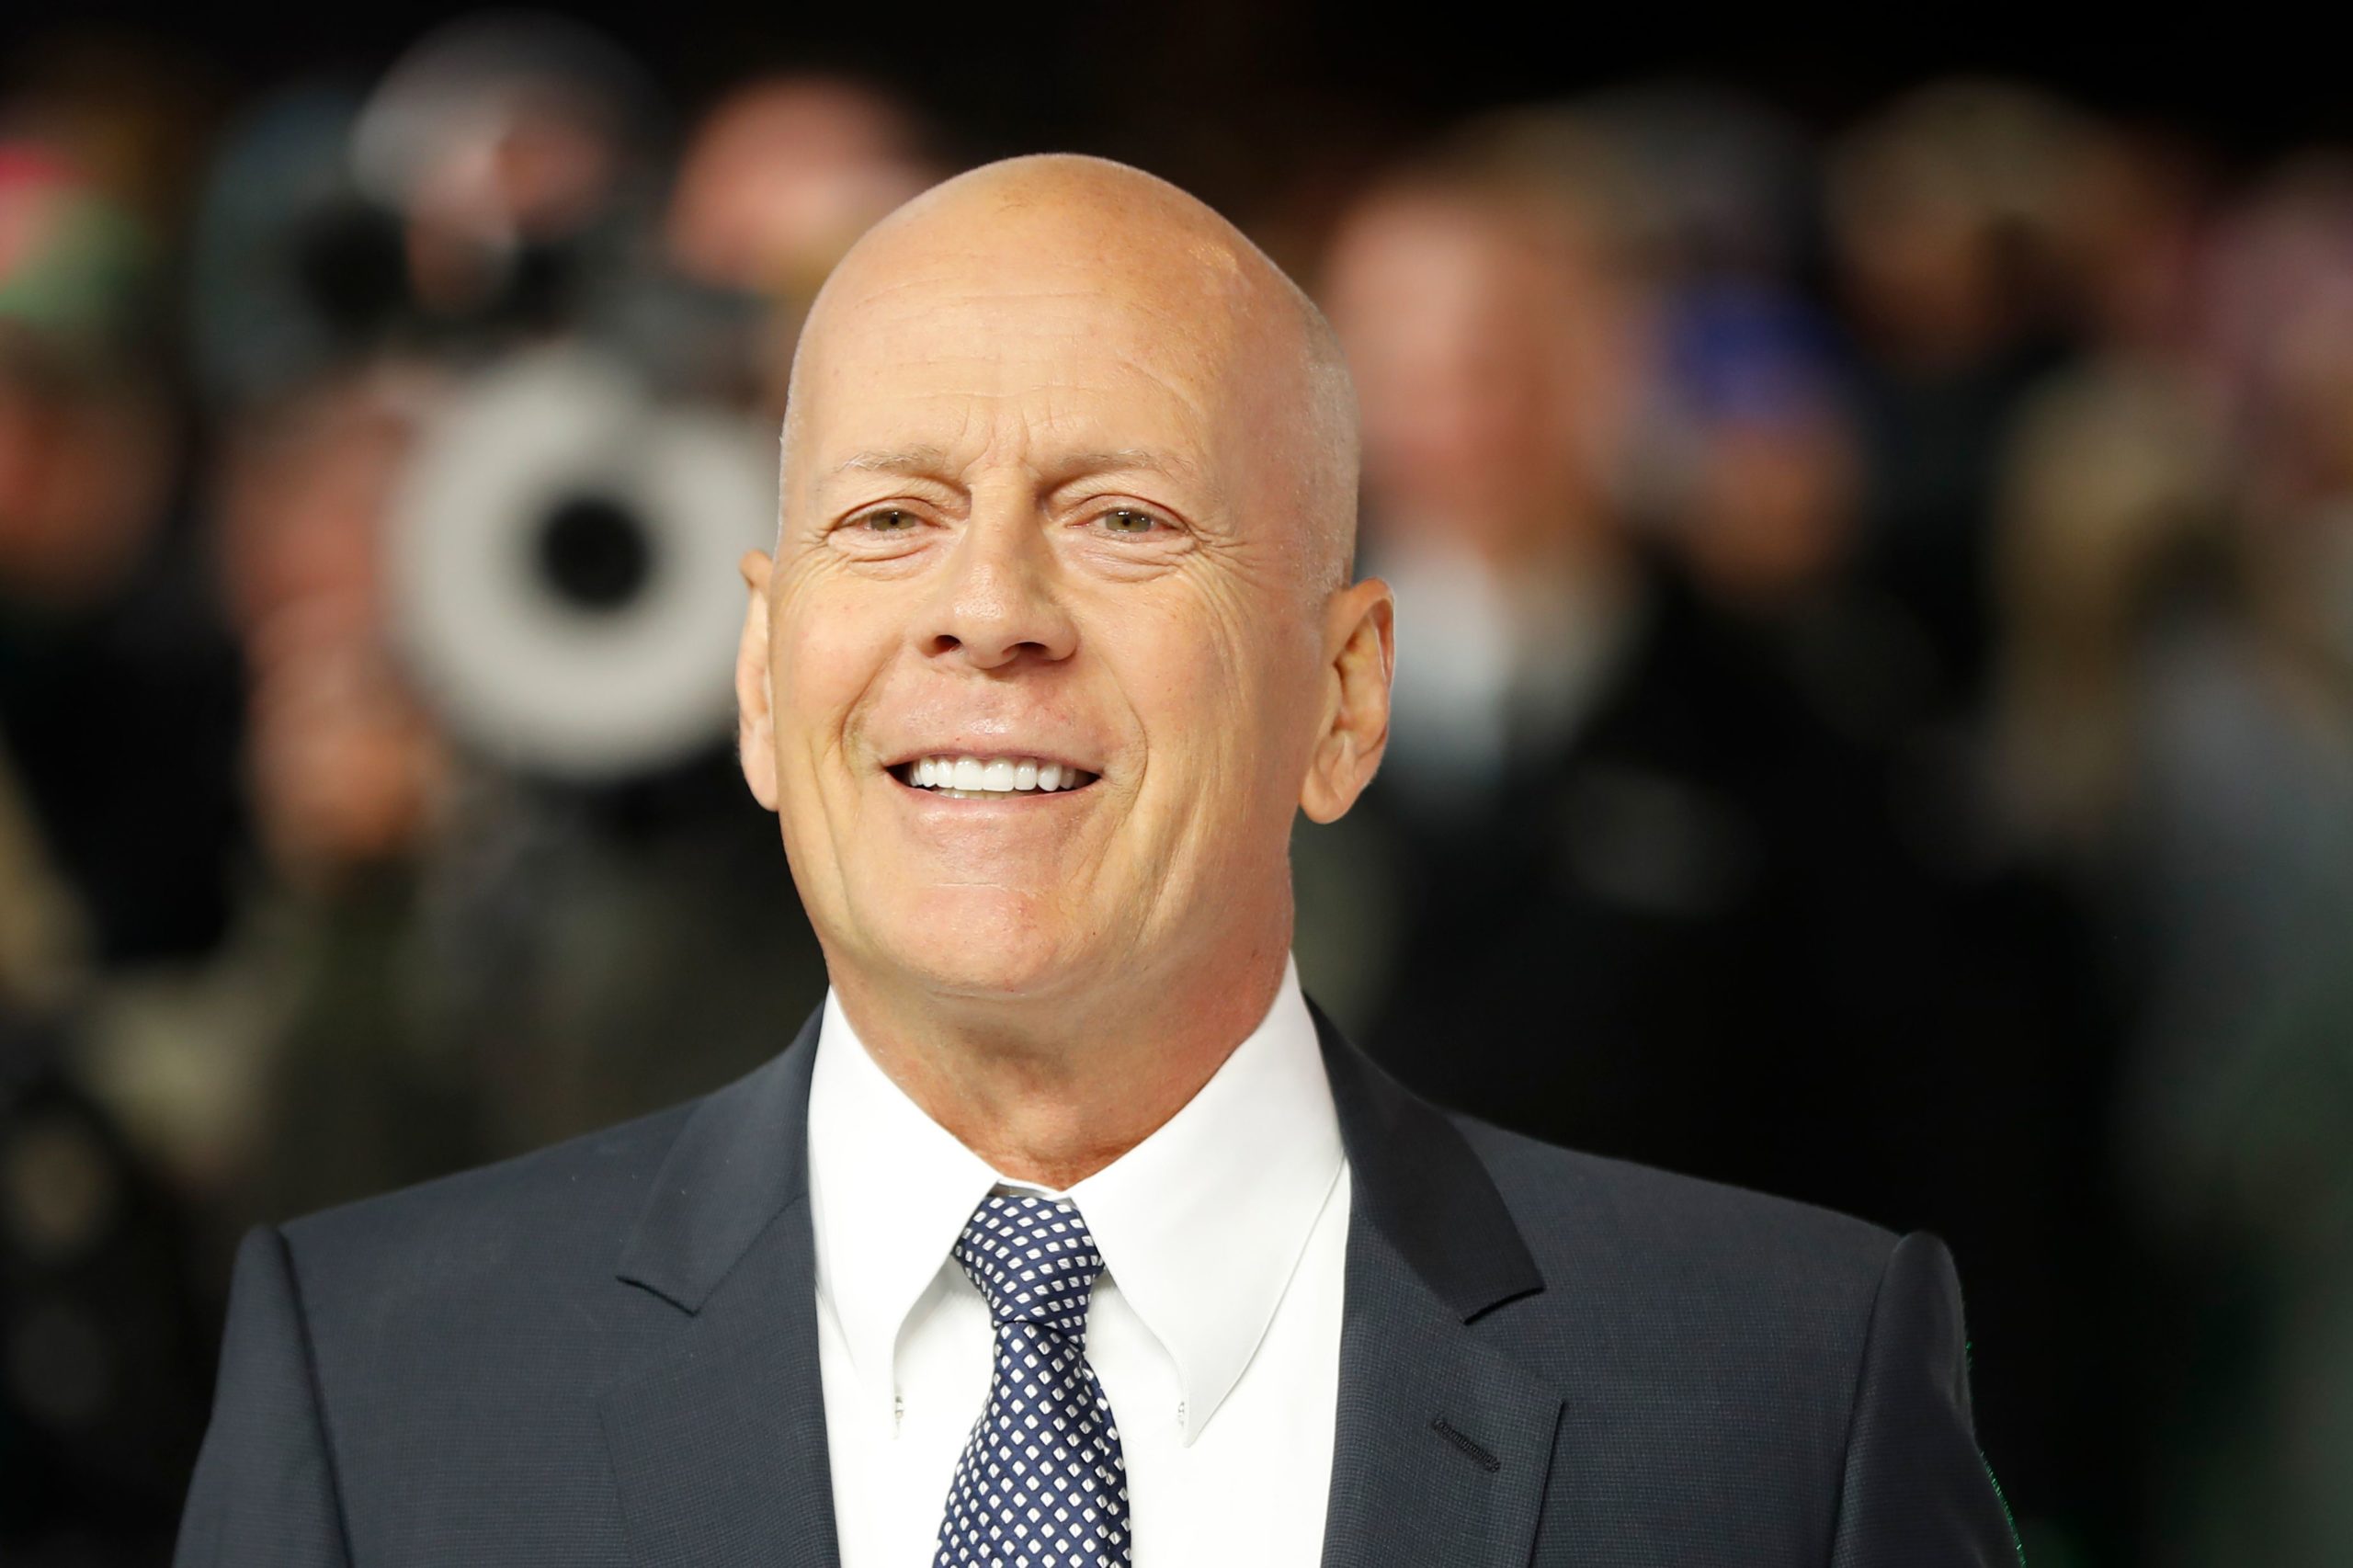 US actor Bruce Willis poses on arrival for the European premiere of Glass in central London on January 9, 2019. (Photo by Tolga AKMEN / AFP) (Photo credit should read TOLGA AKMEN/AFP via Getty Images)